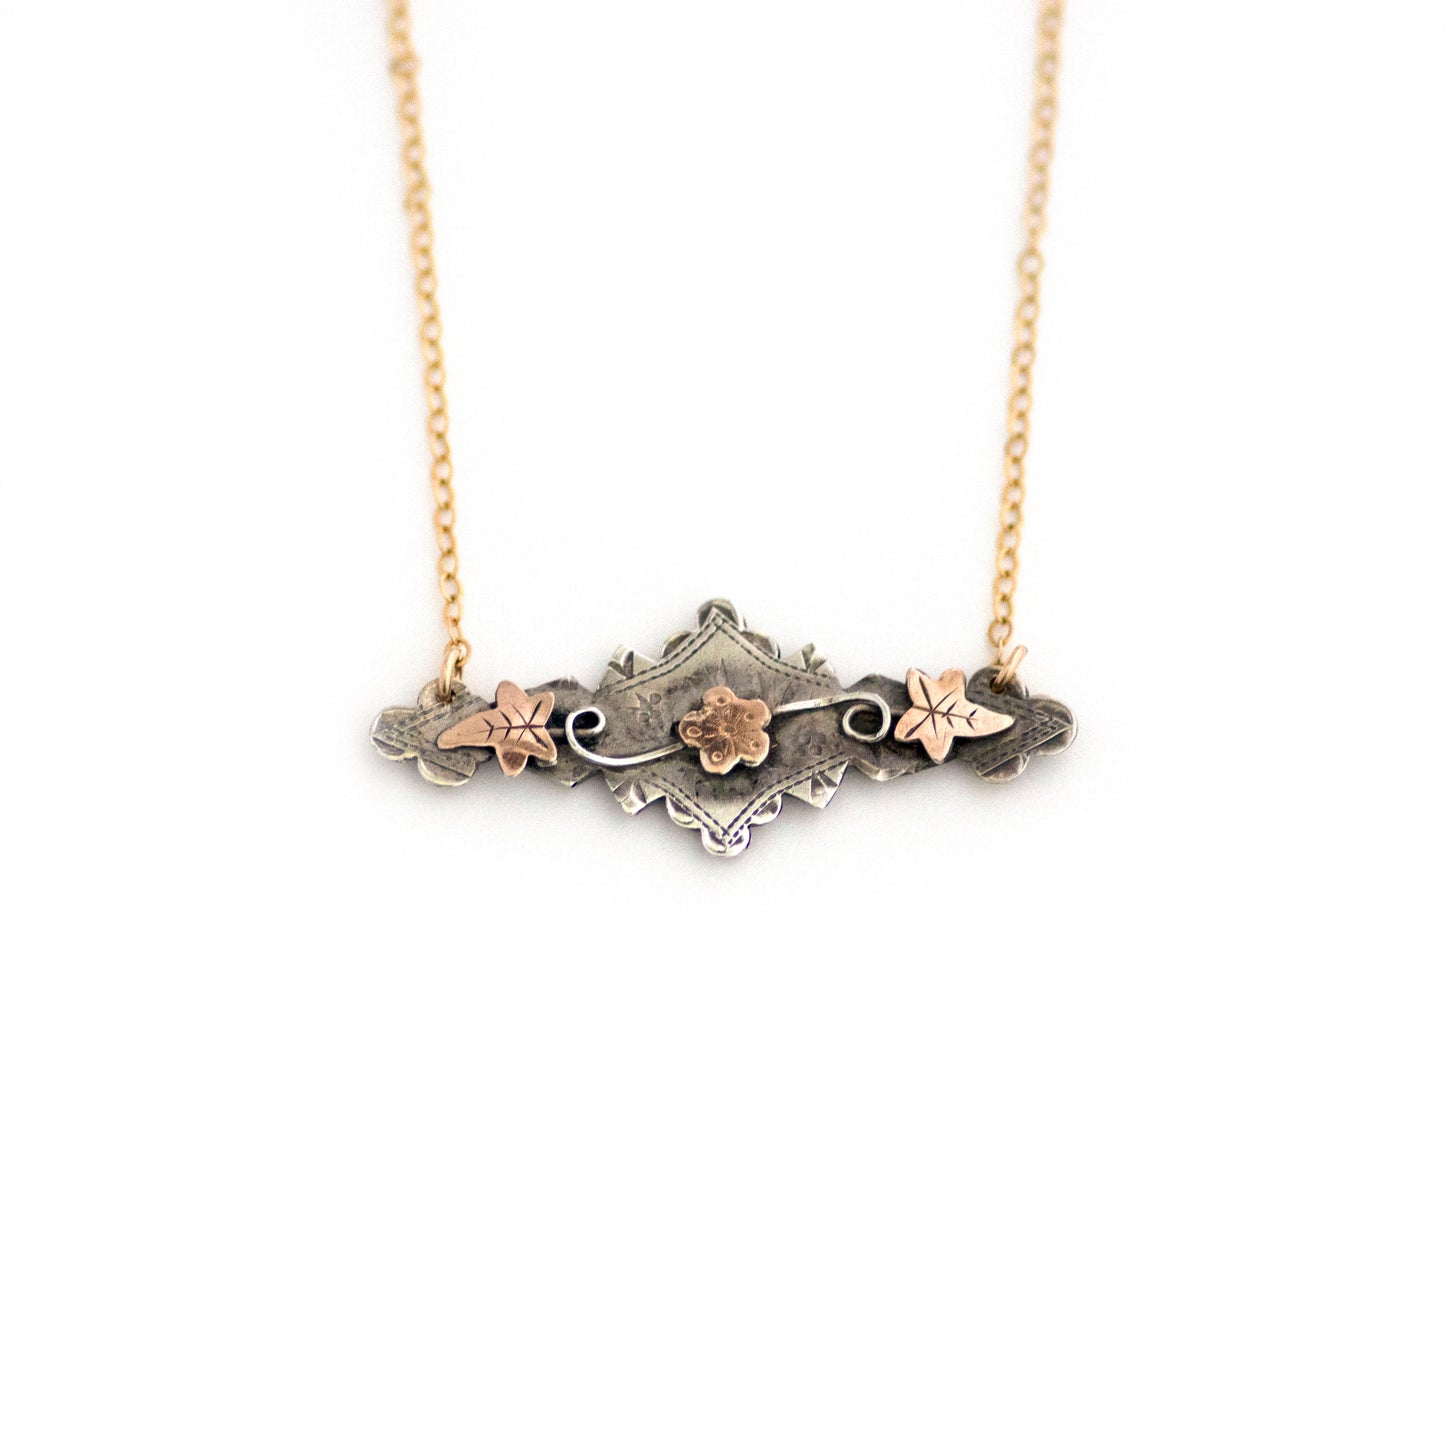 This one-of-a-kind conversion necklace is made up of:  Sterling silver and gold filled Victorian bar pin pendant from the late 1800s with hand tooled details including floral, vine and leaves accents.